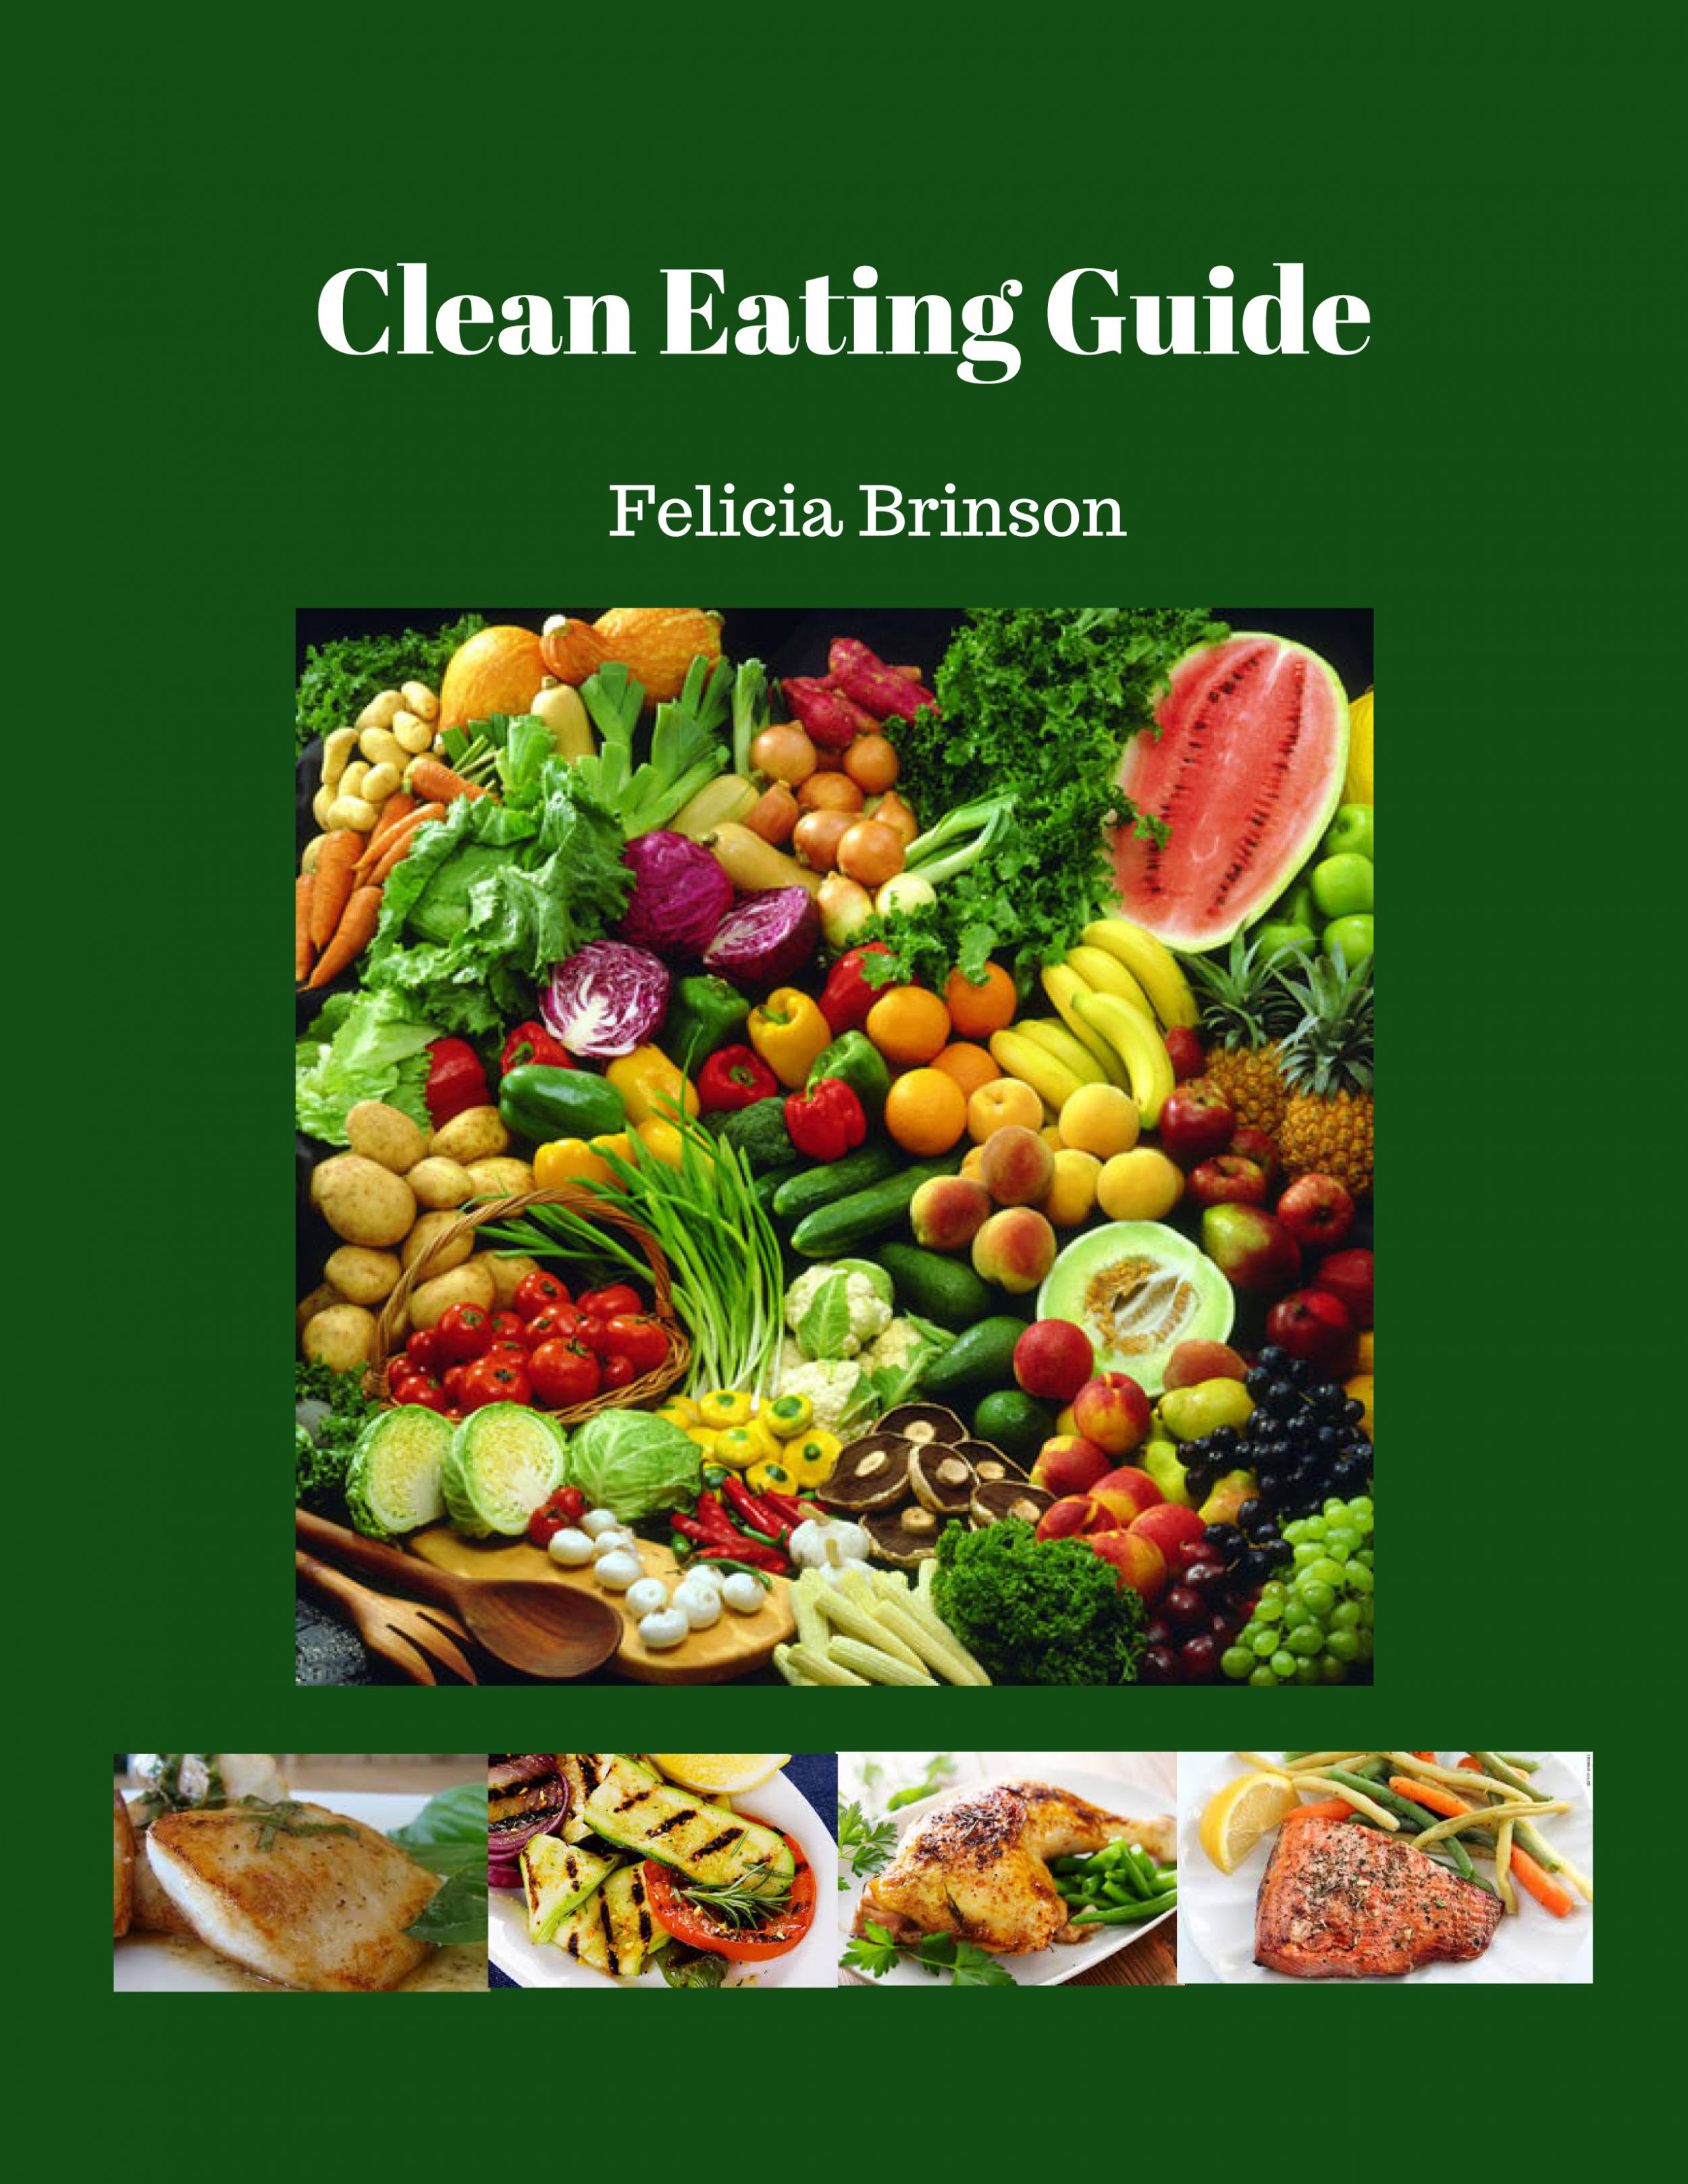 How to Eat Clean with Healthy Food Choices